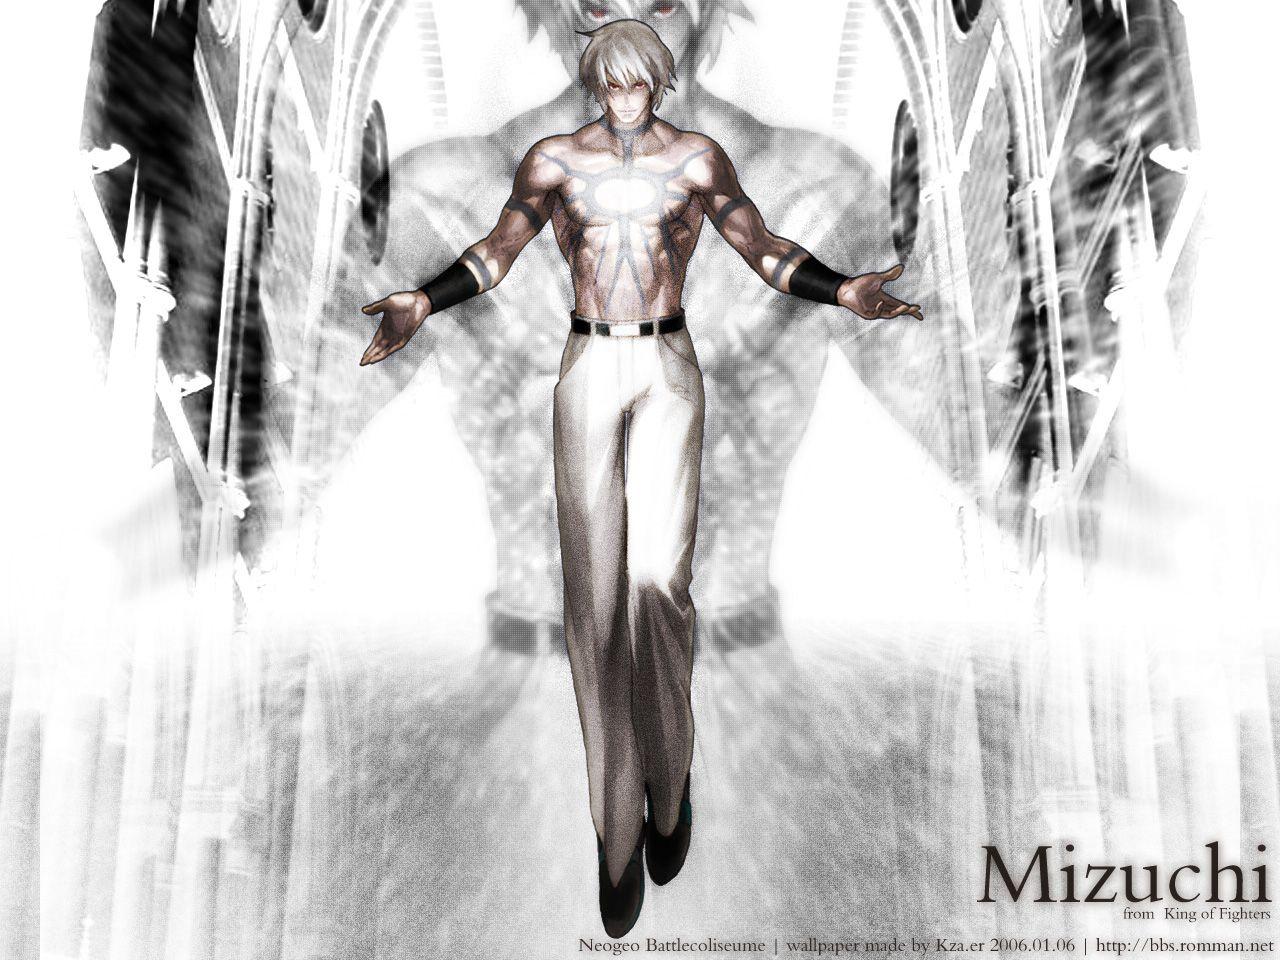 Mizuchi <3. King of Fighters (Mostly Orochi)